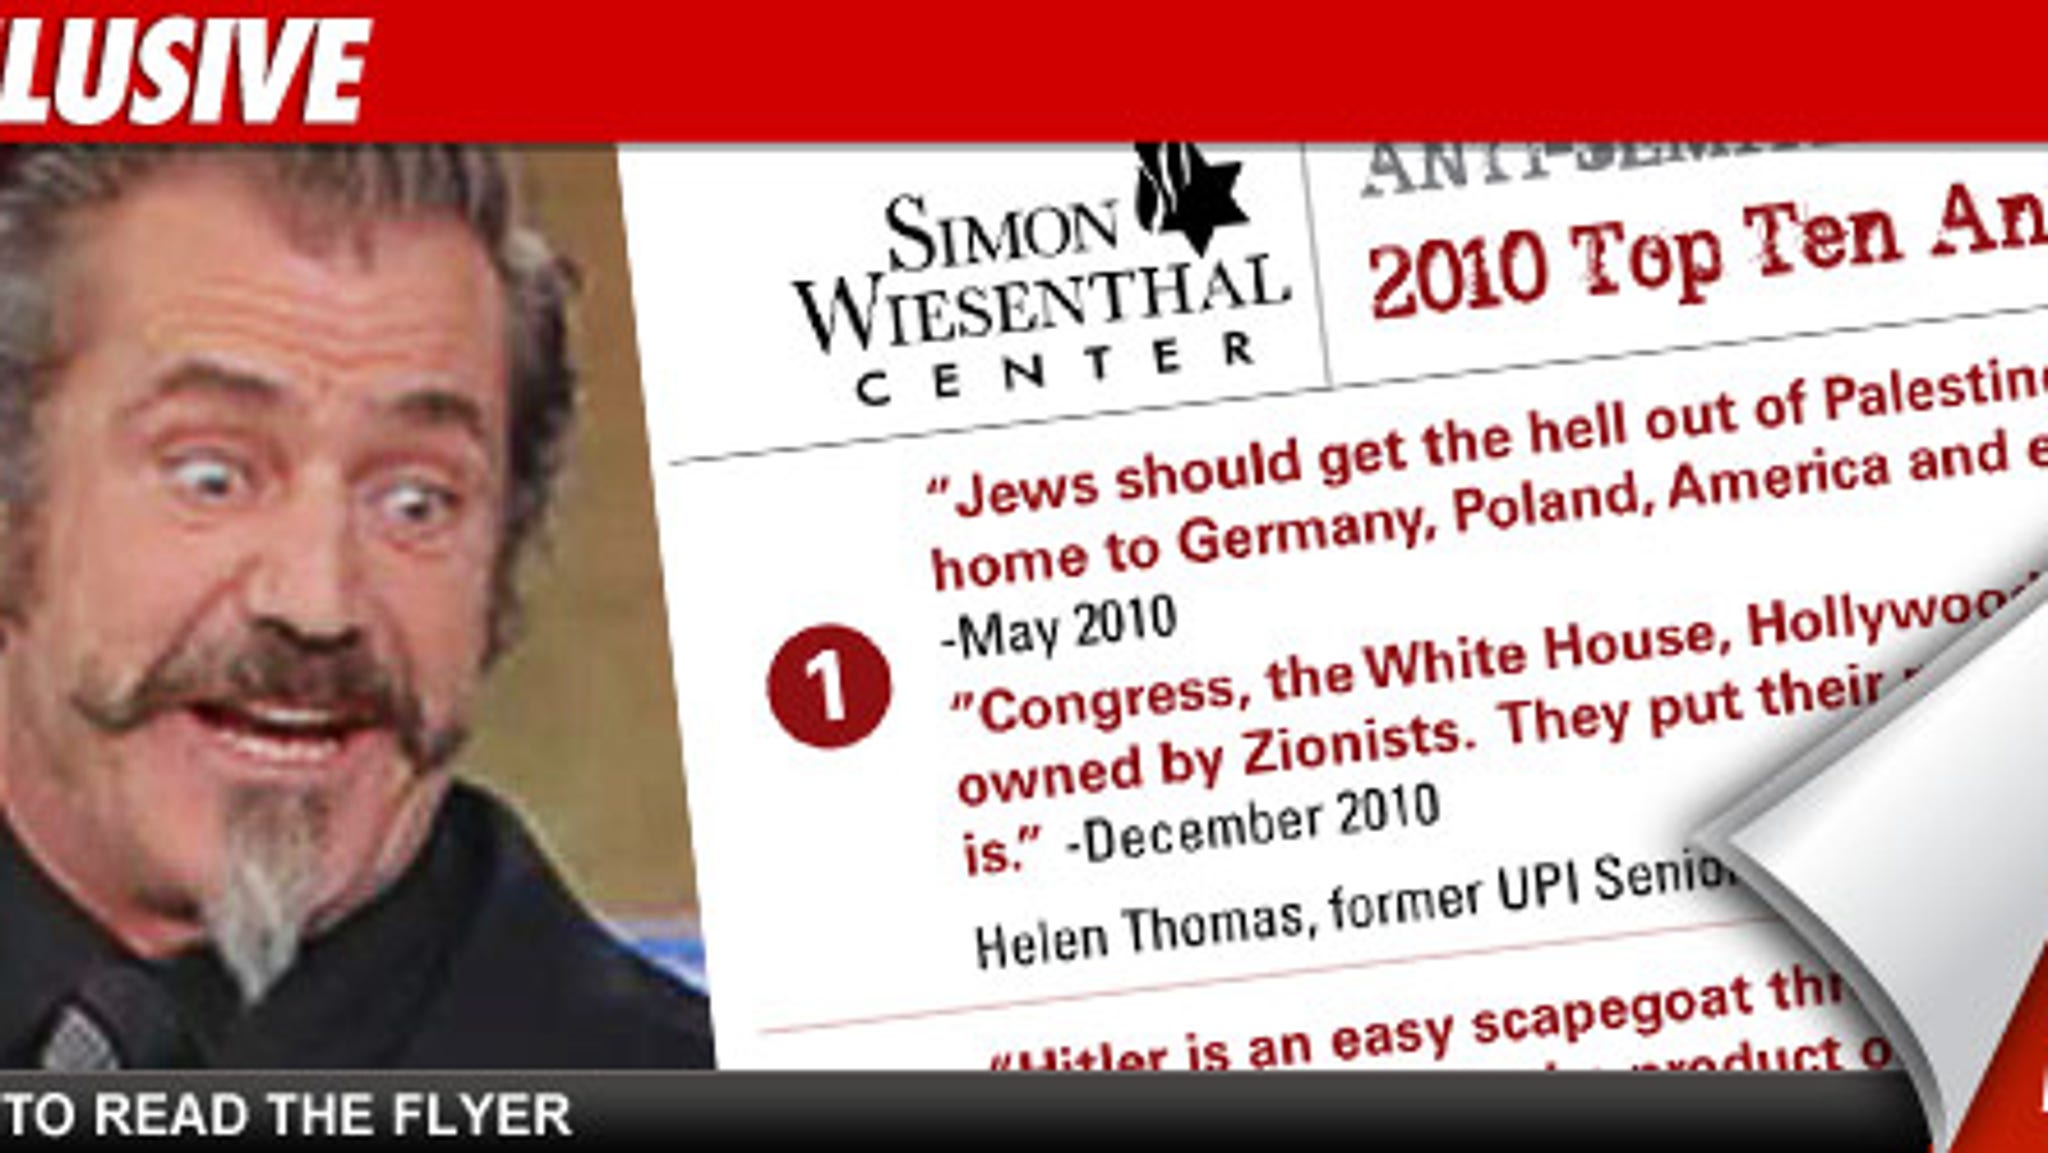 Mel Gibson Does Not Make Top 10 Anti-Semitic List of Simon Wiesenthal